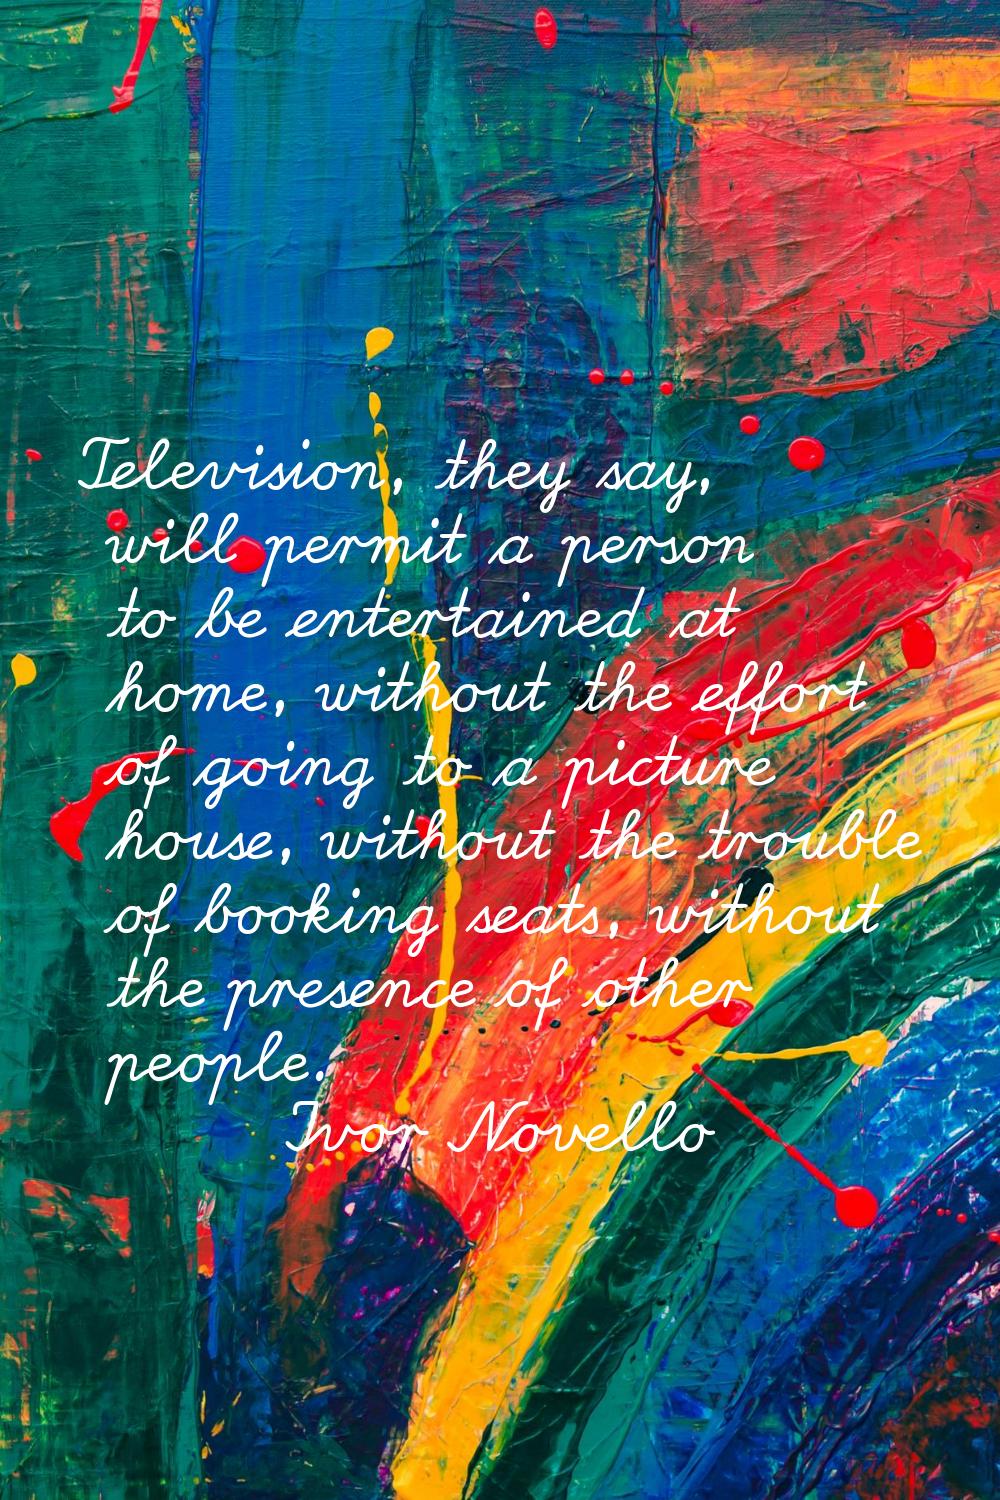 Television, they say, will permit a person to be entertained at home, without the effort of going t